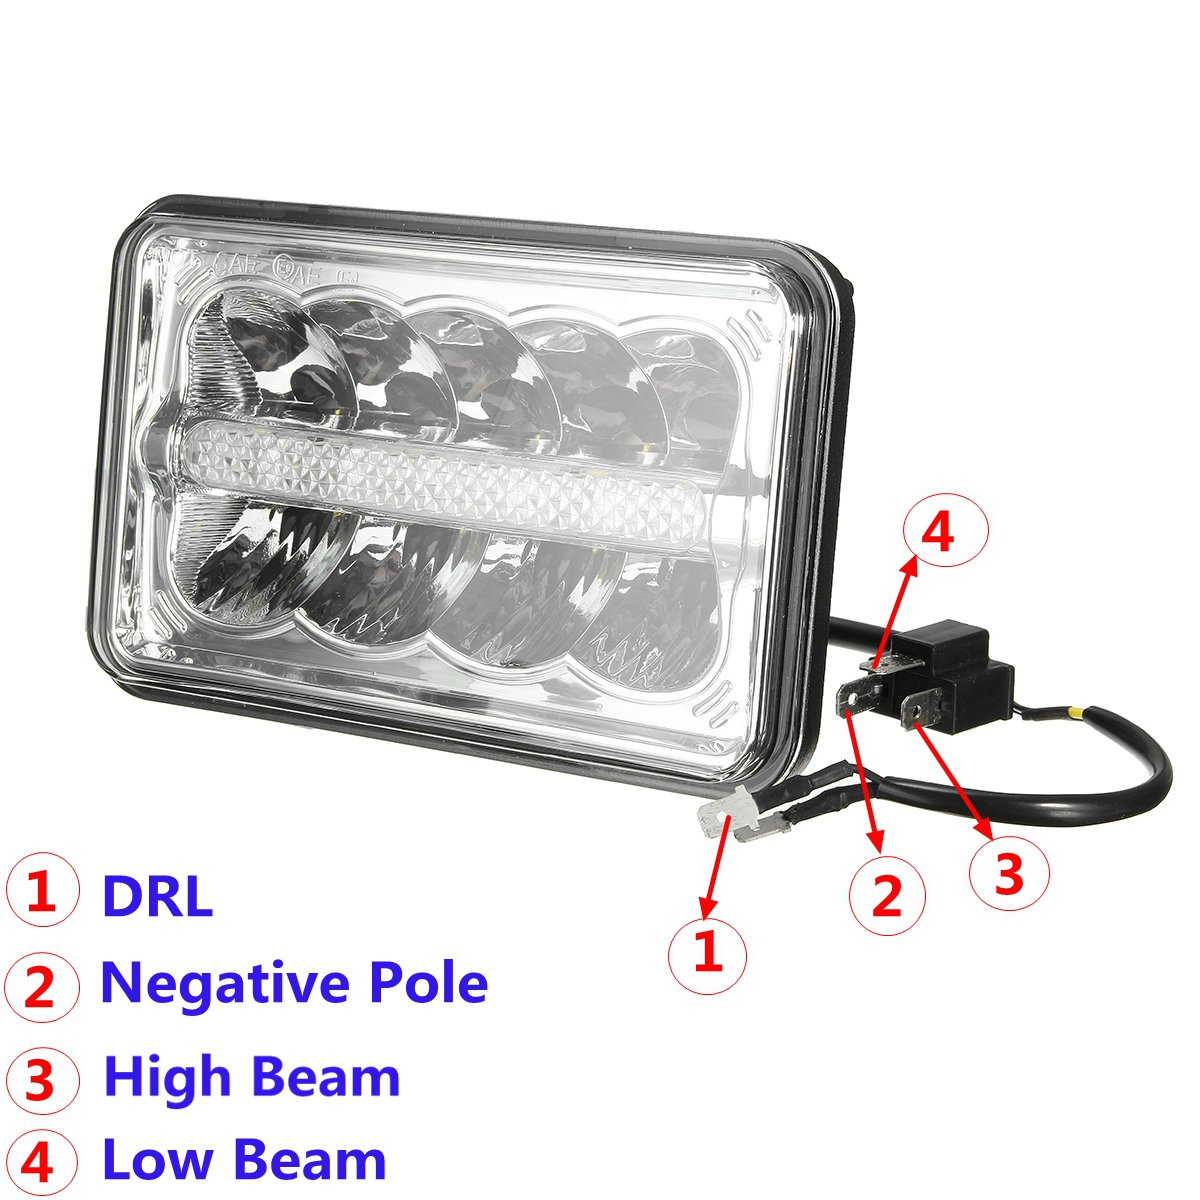 1Pcs-4X6-Inch-H4-20W-LED-Headlights-Lamp-White-WDRL-HiLo-Beam-for-Truck-Pickup-Trailer-1111379